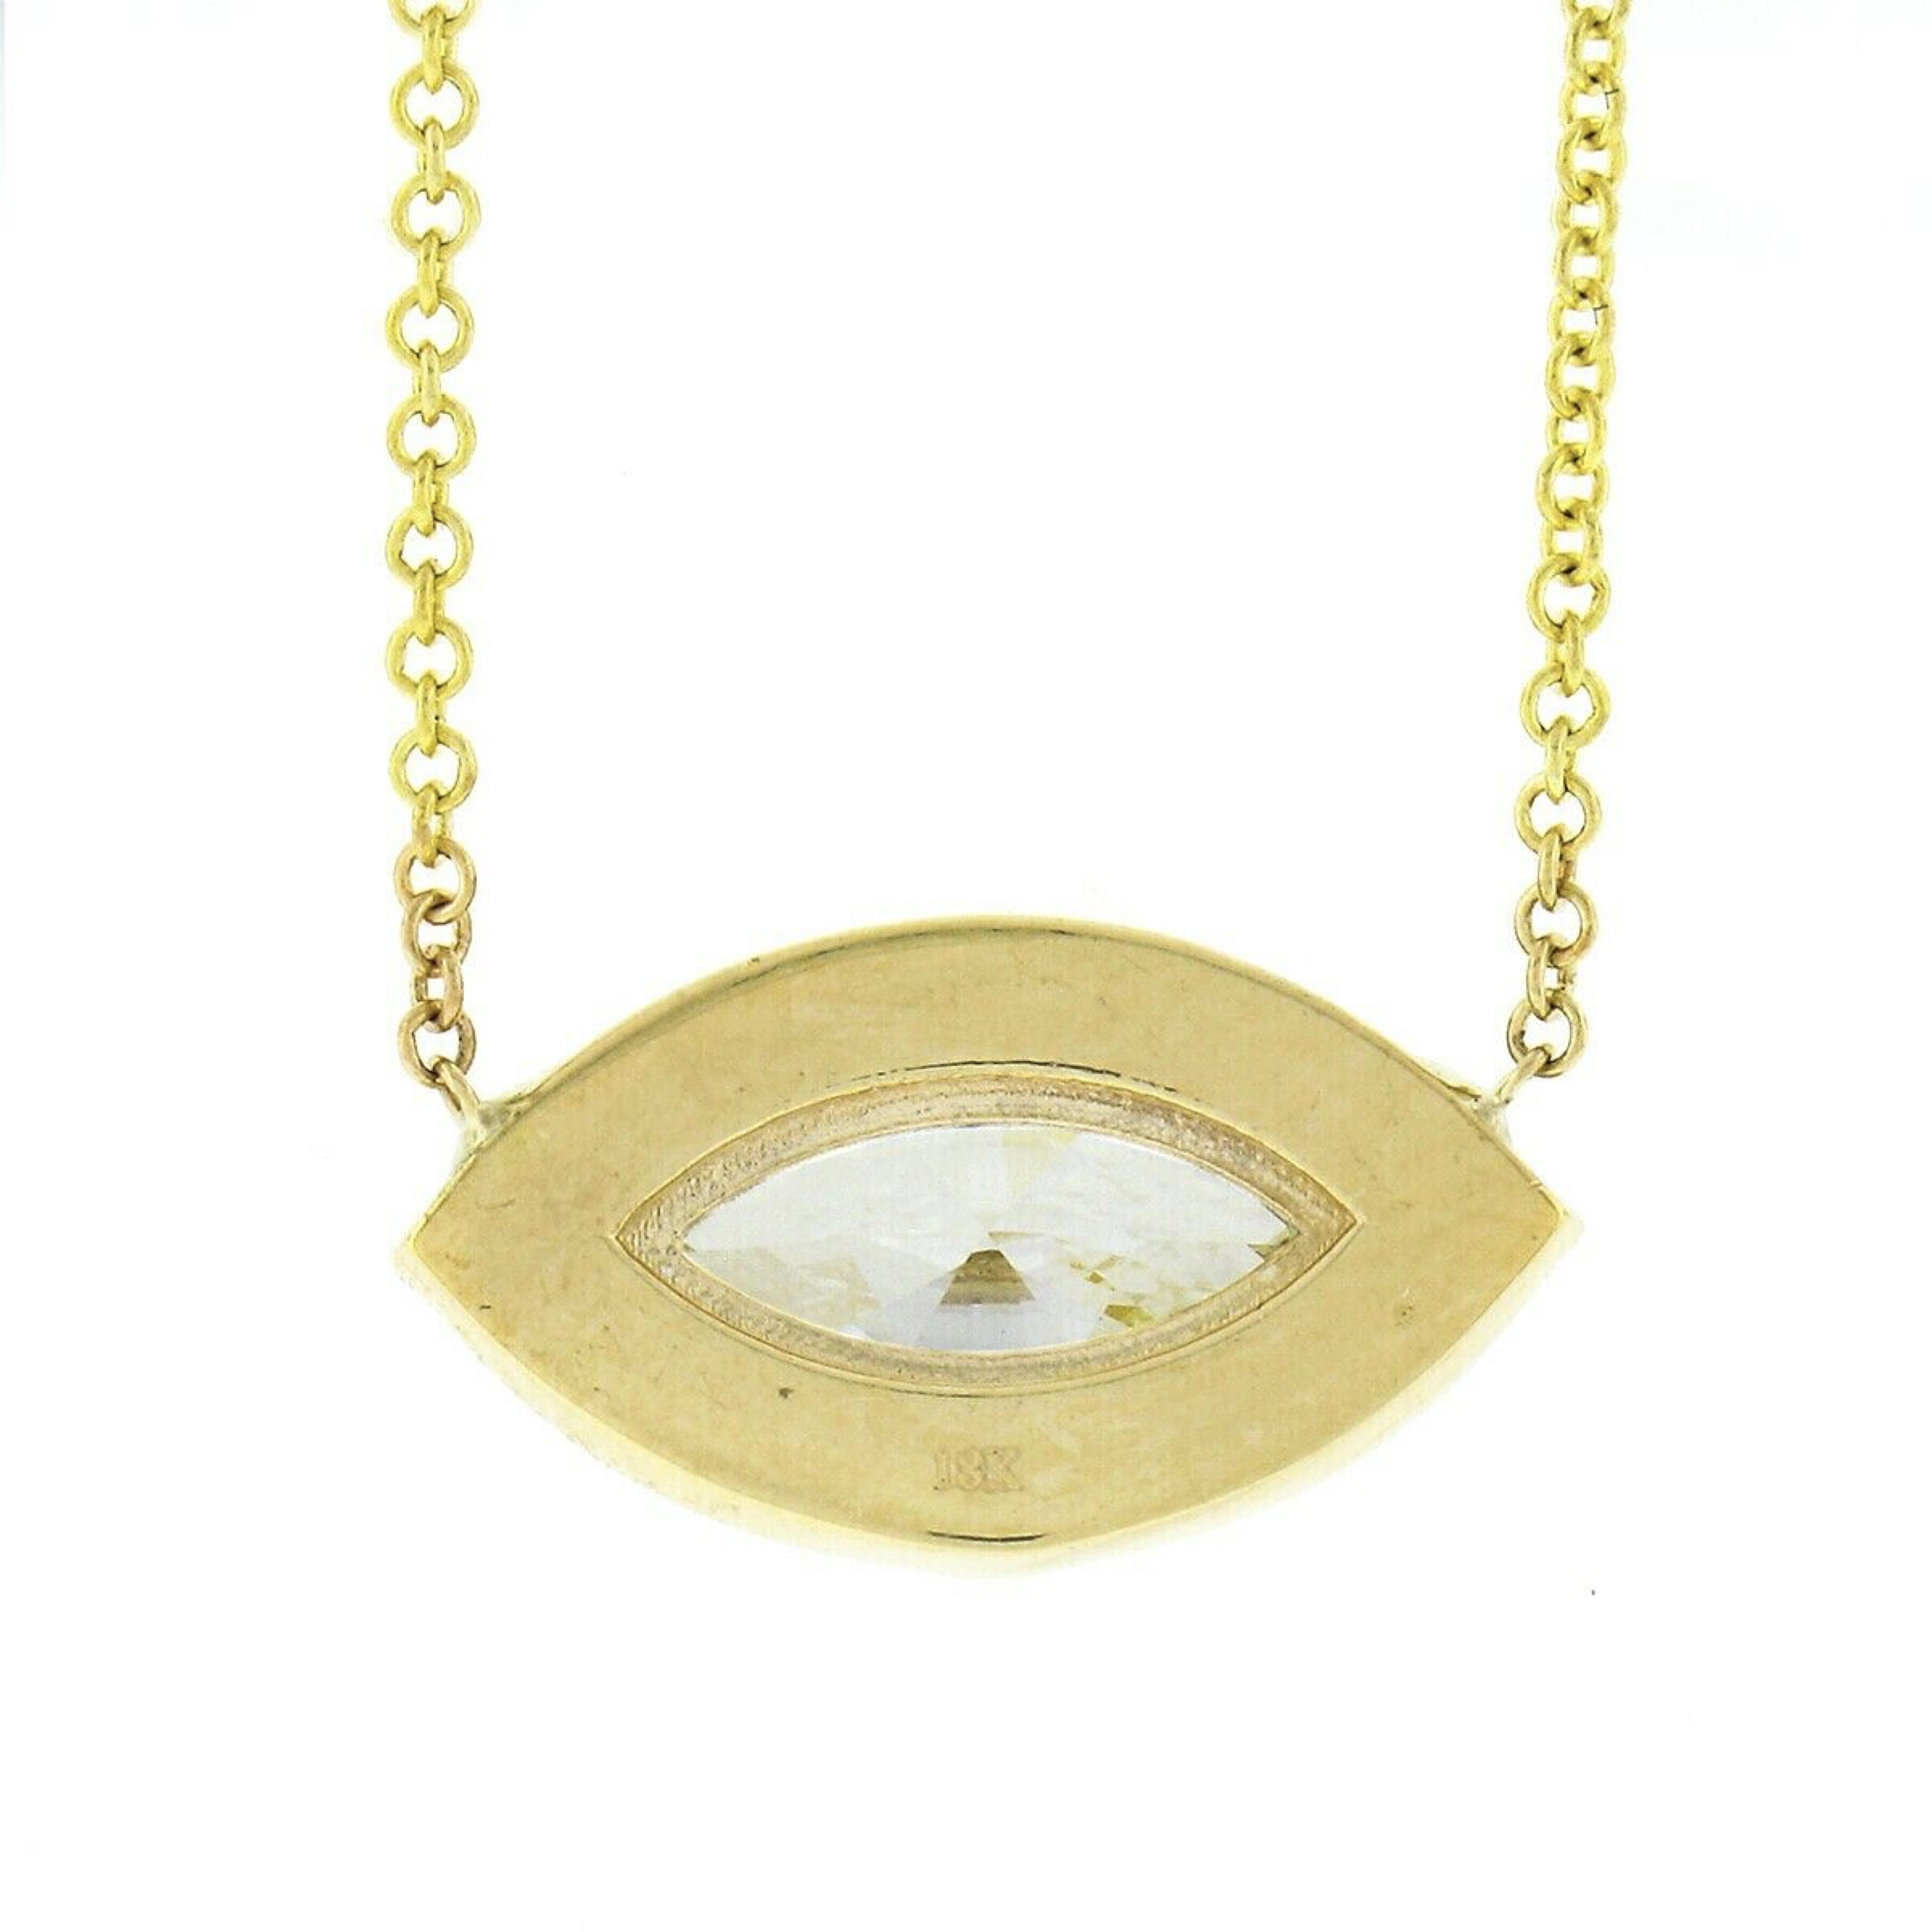 New 18K Gold Marquise Diamond W/ Halo Eye Pendant & Adjustable Chain Necklace For Sale 1